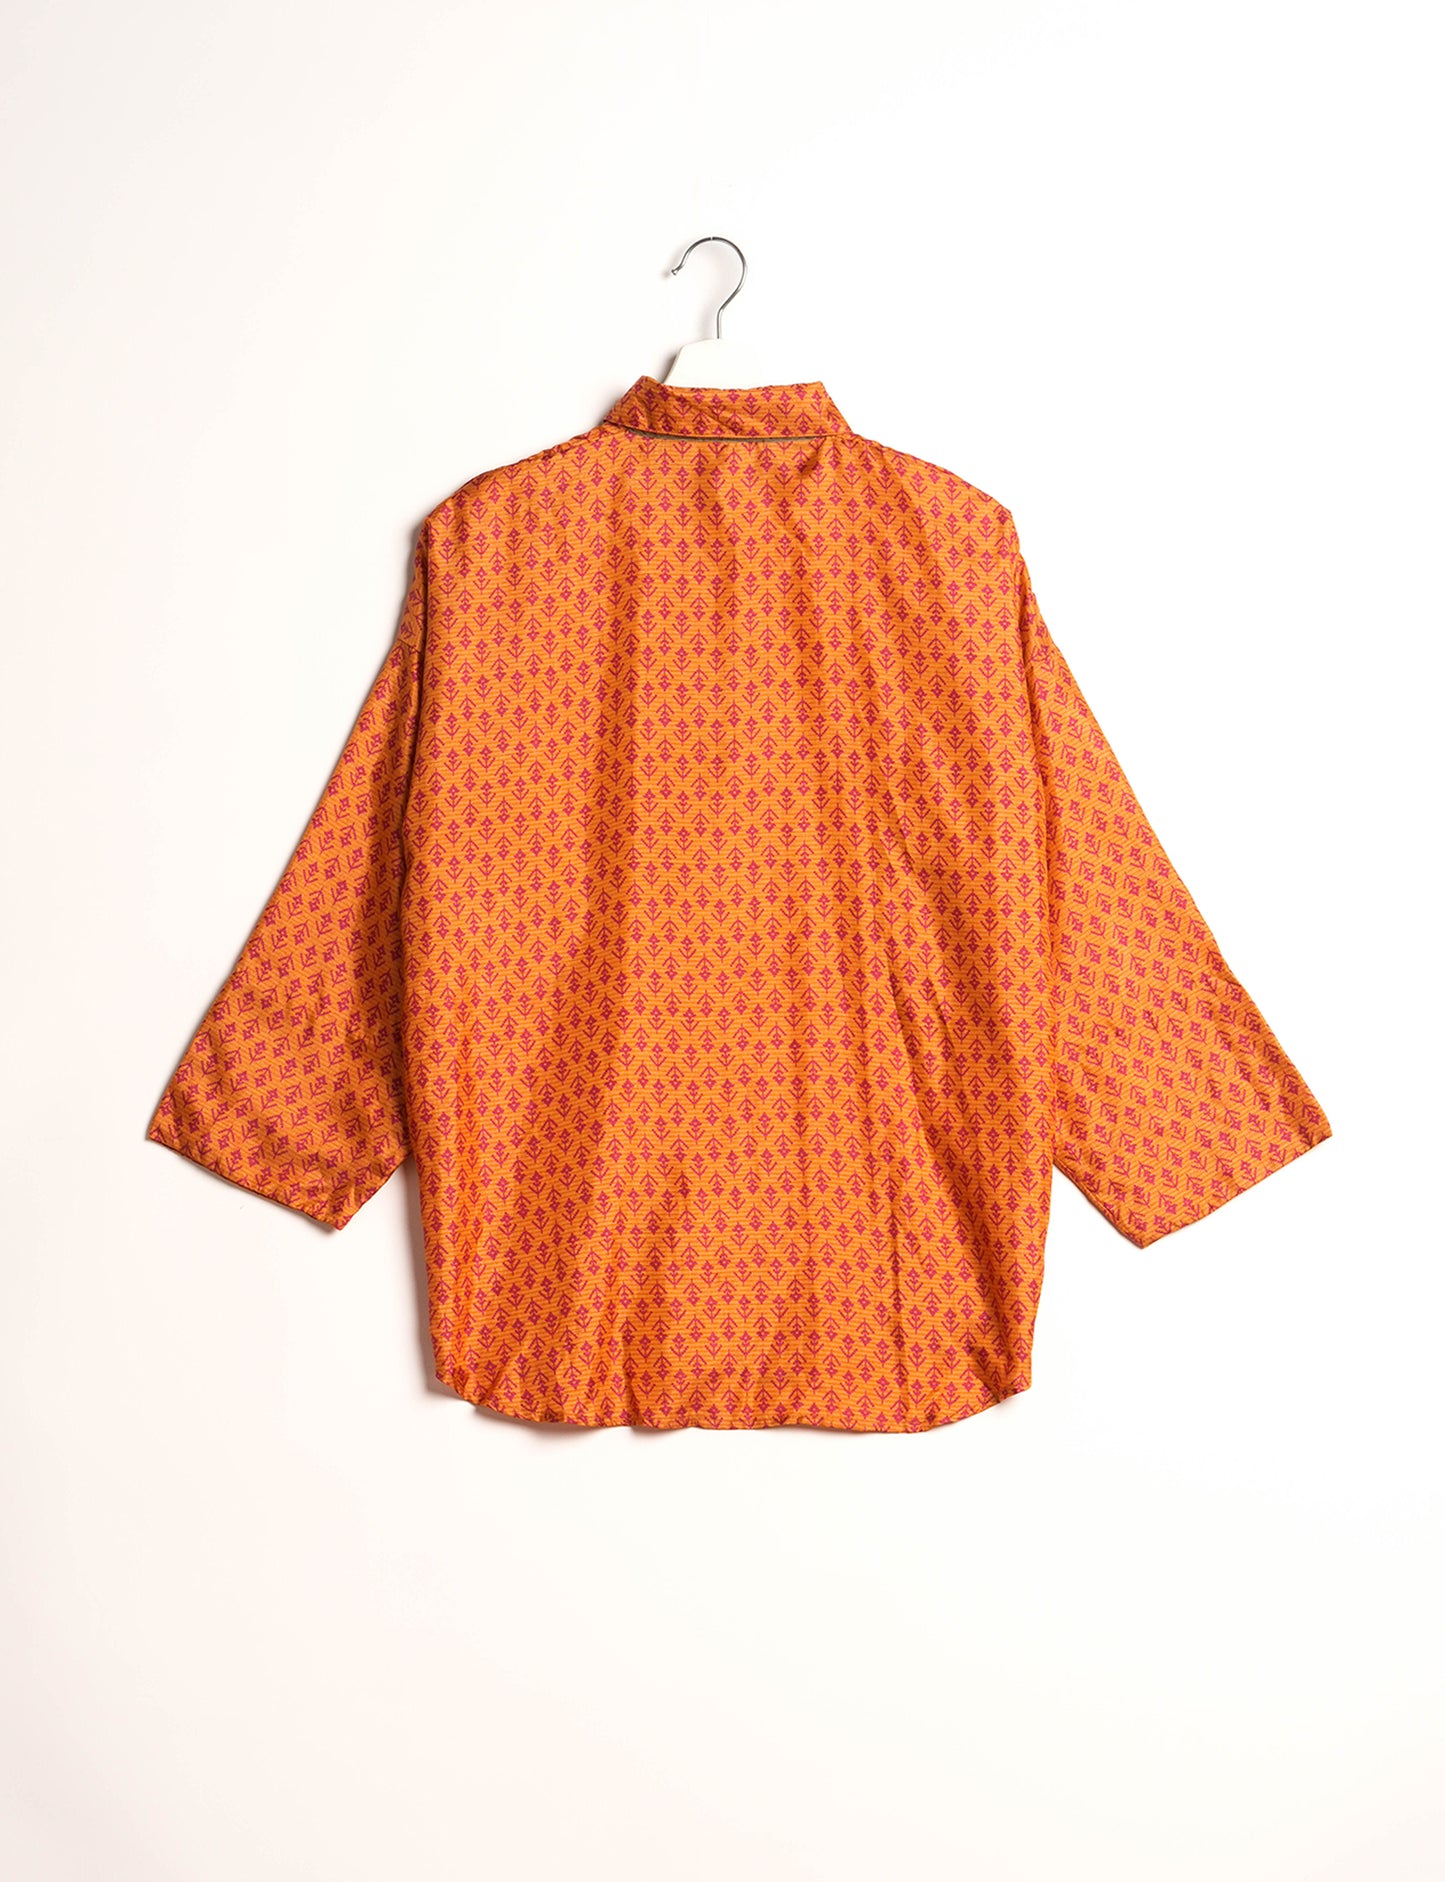 Experience chic comfort with our OVERSIZED SHIRT – a one-of-a-kind piece crafted from sari waste by talented Indian female artisans. With 3/4 length sleeves, a regular shirt collar, and a contrasting inner collar band, this shirt is perfect for work or casual hangouts. Versatile and stylish, it pairs effortlessly over a shift dress, jumpsuit, or with pants.